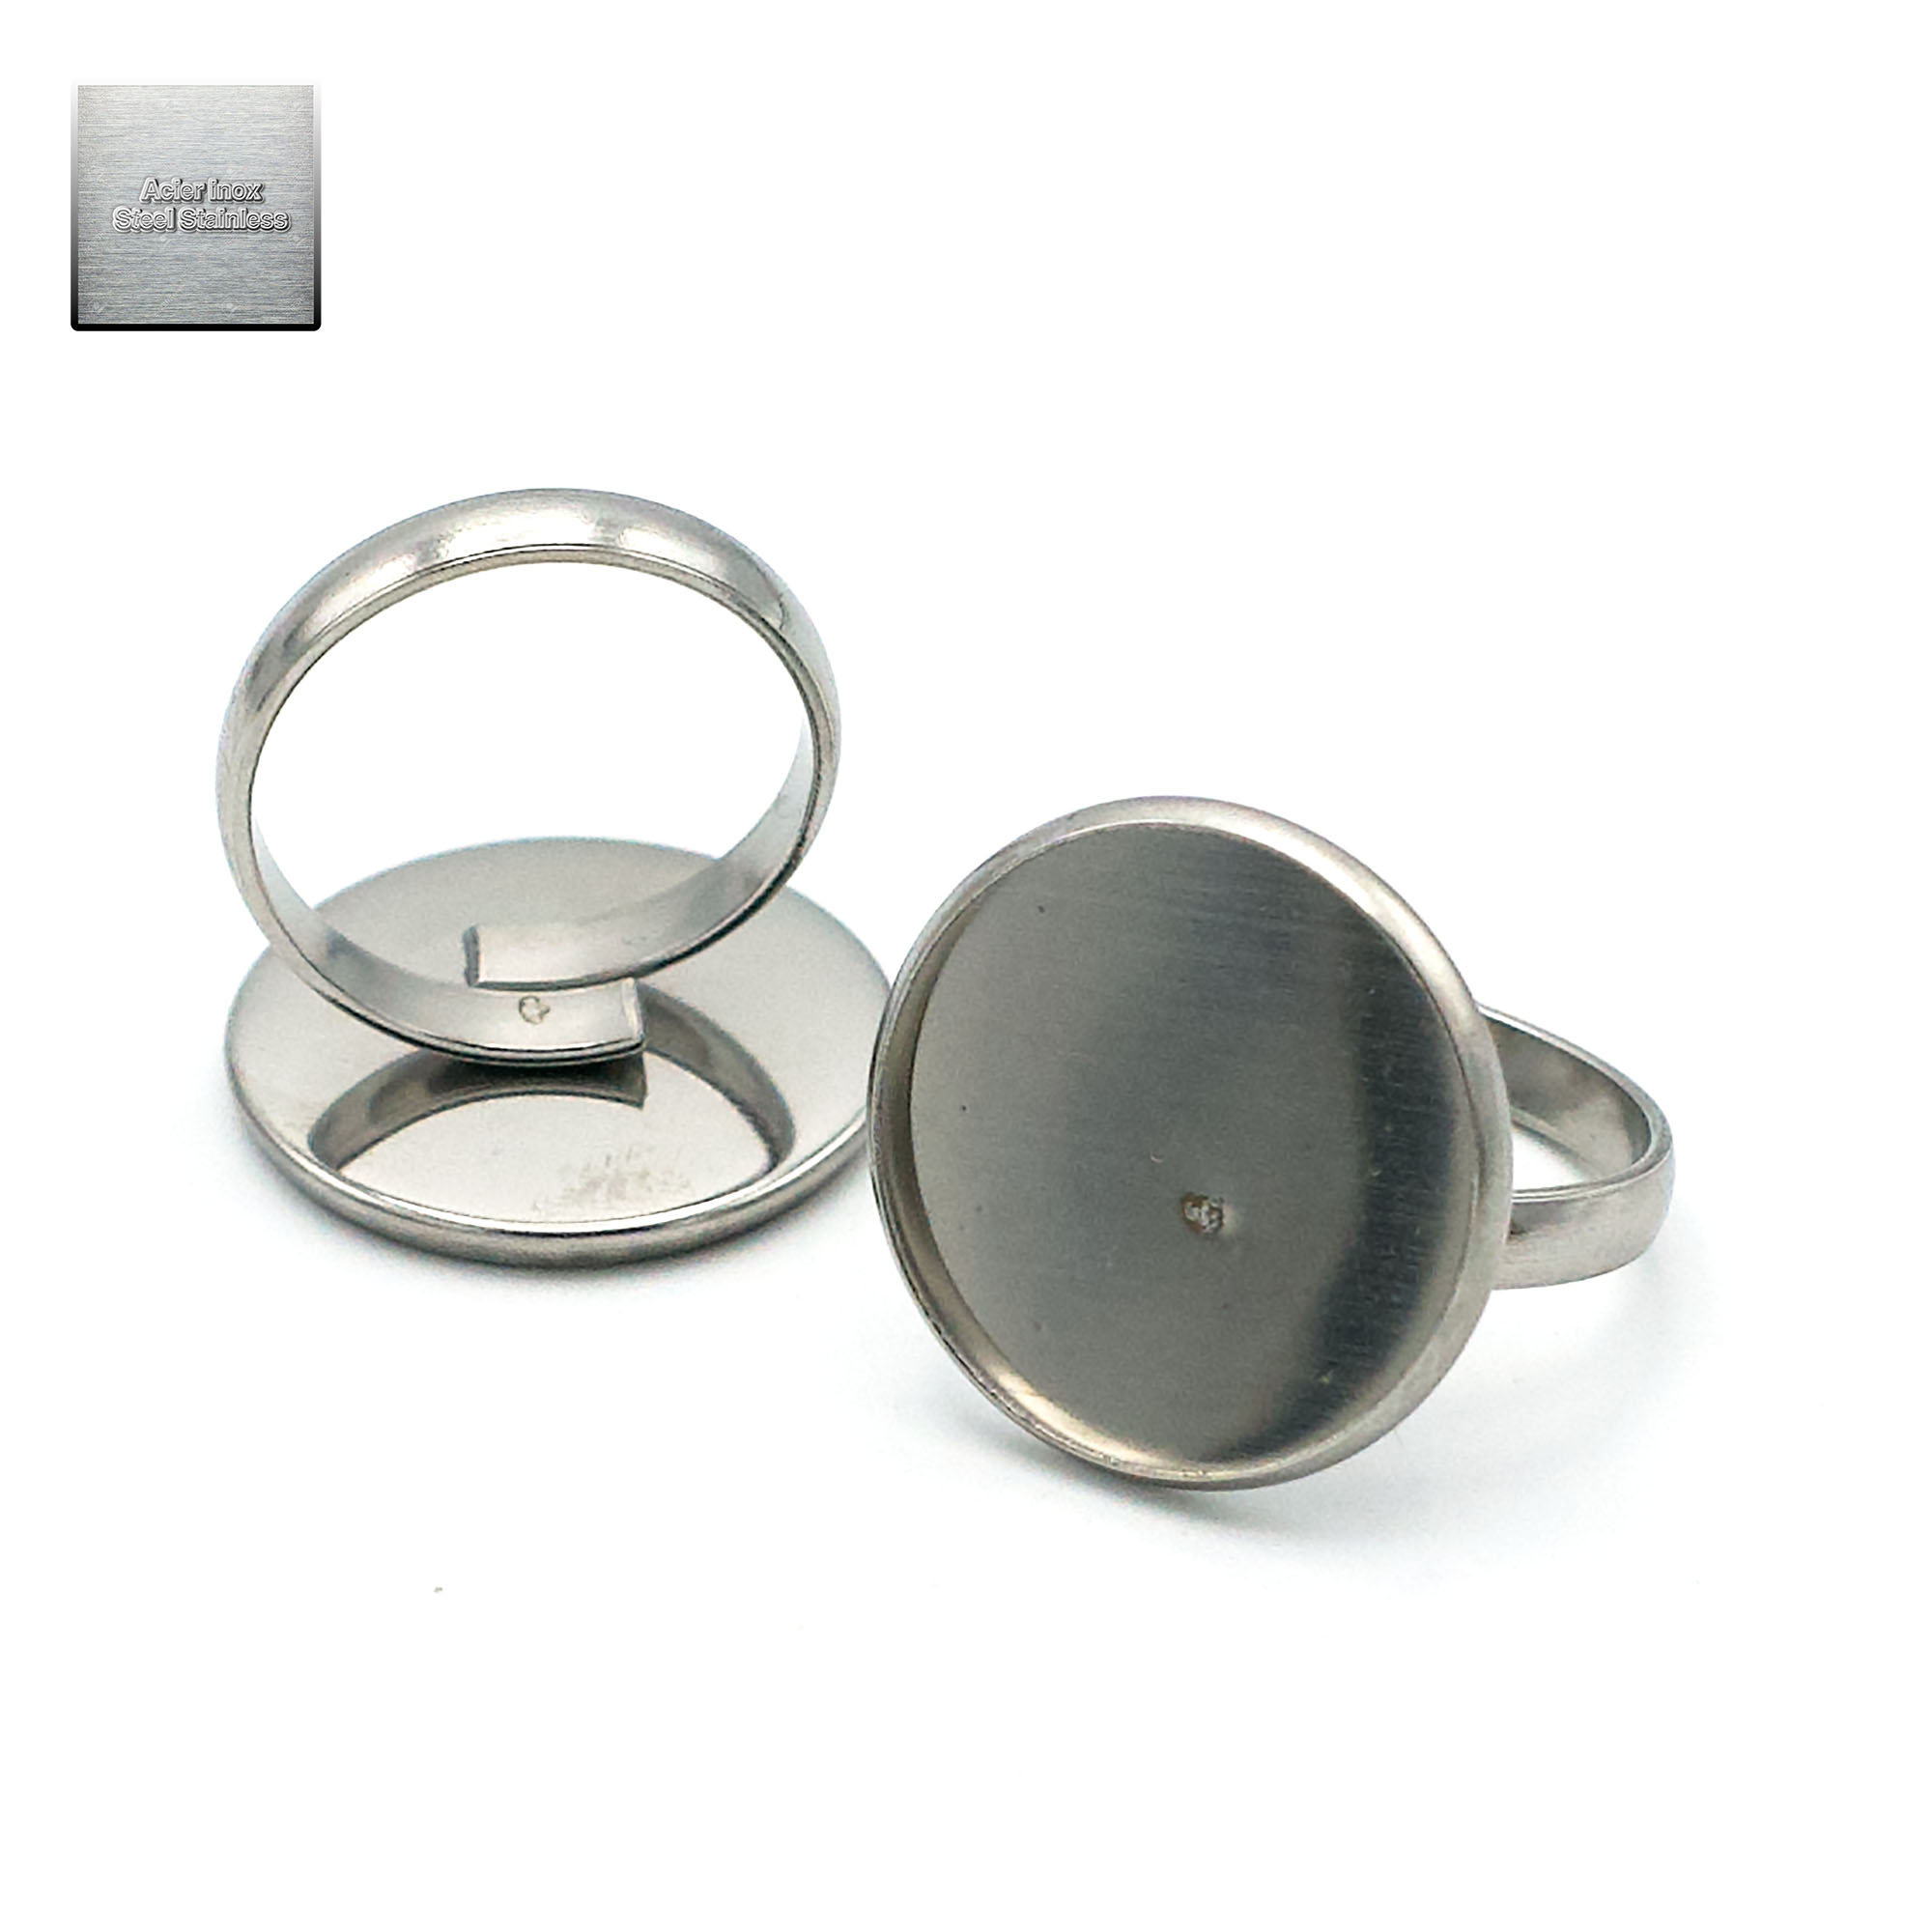 Acier inox: 2 bagues support cabochon ronde 20 mm, steel stainless